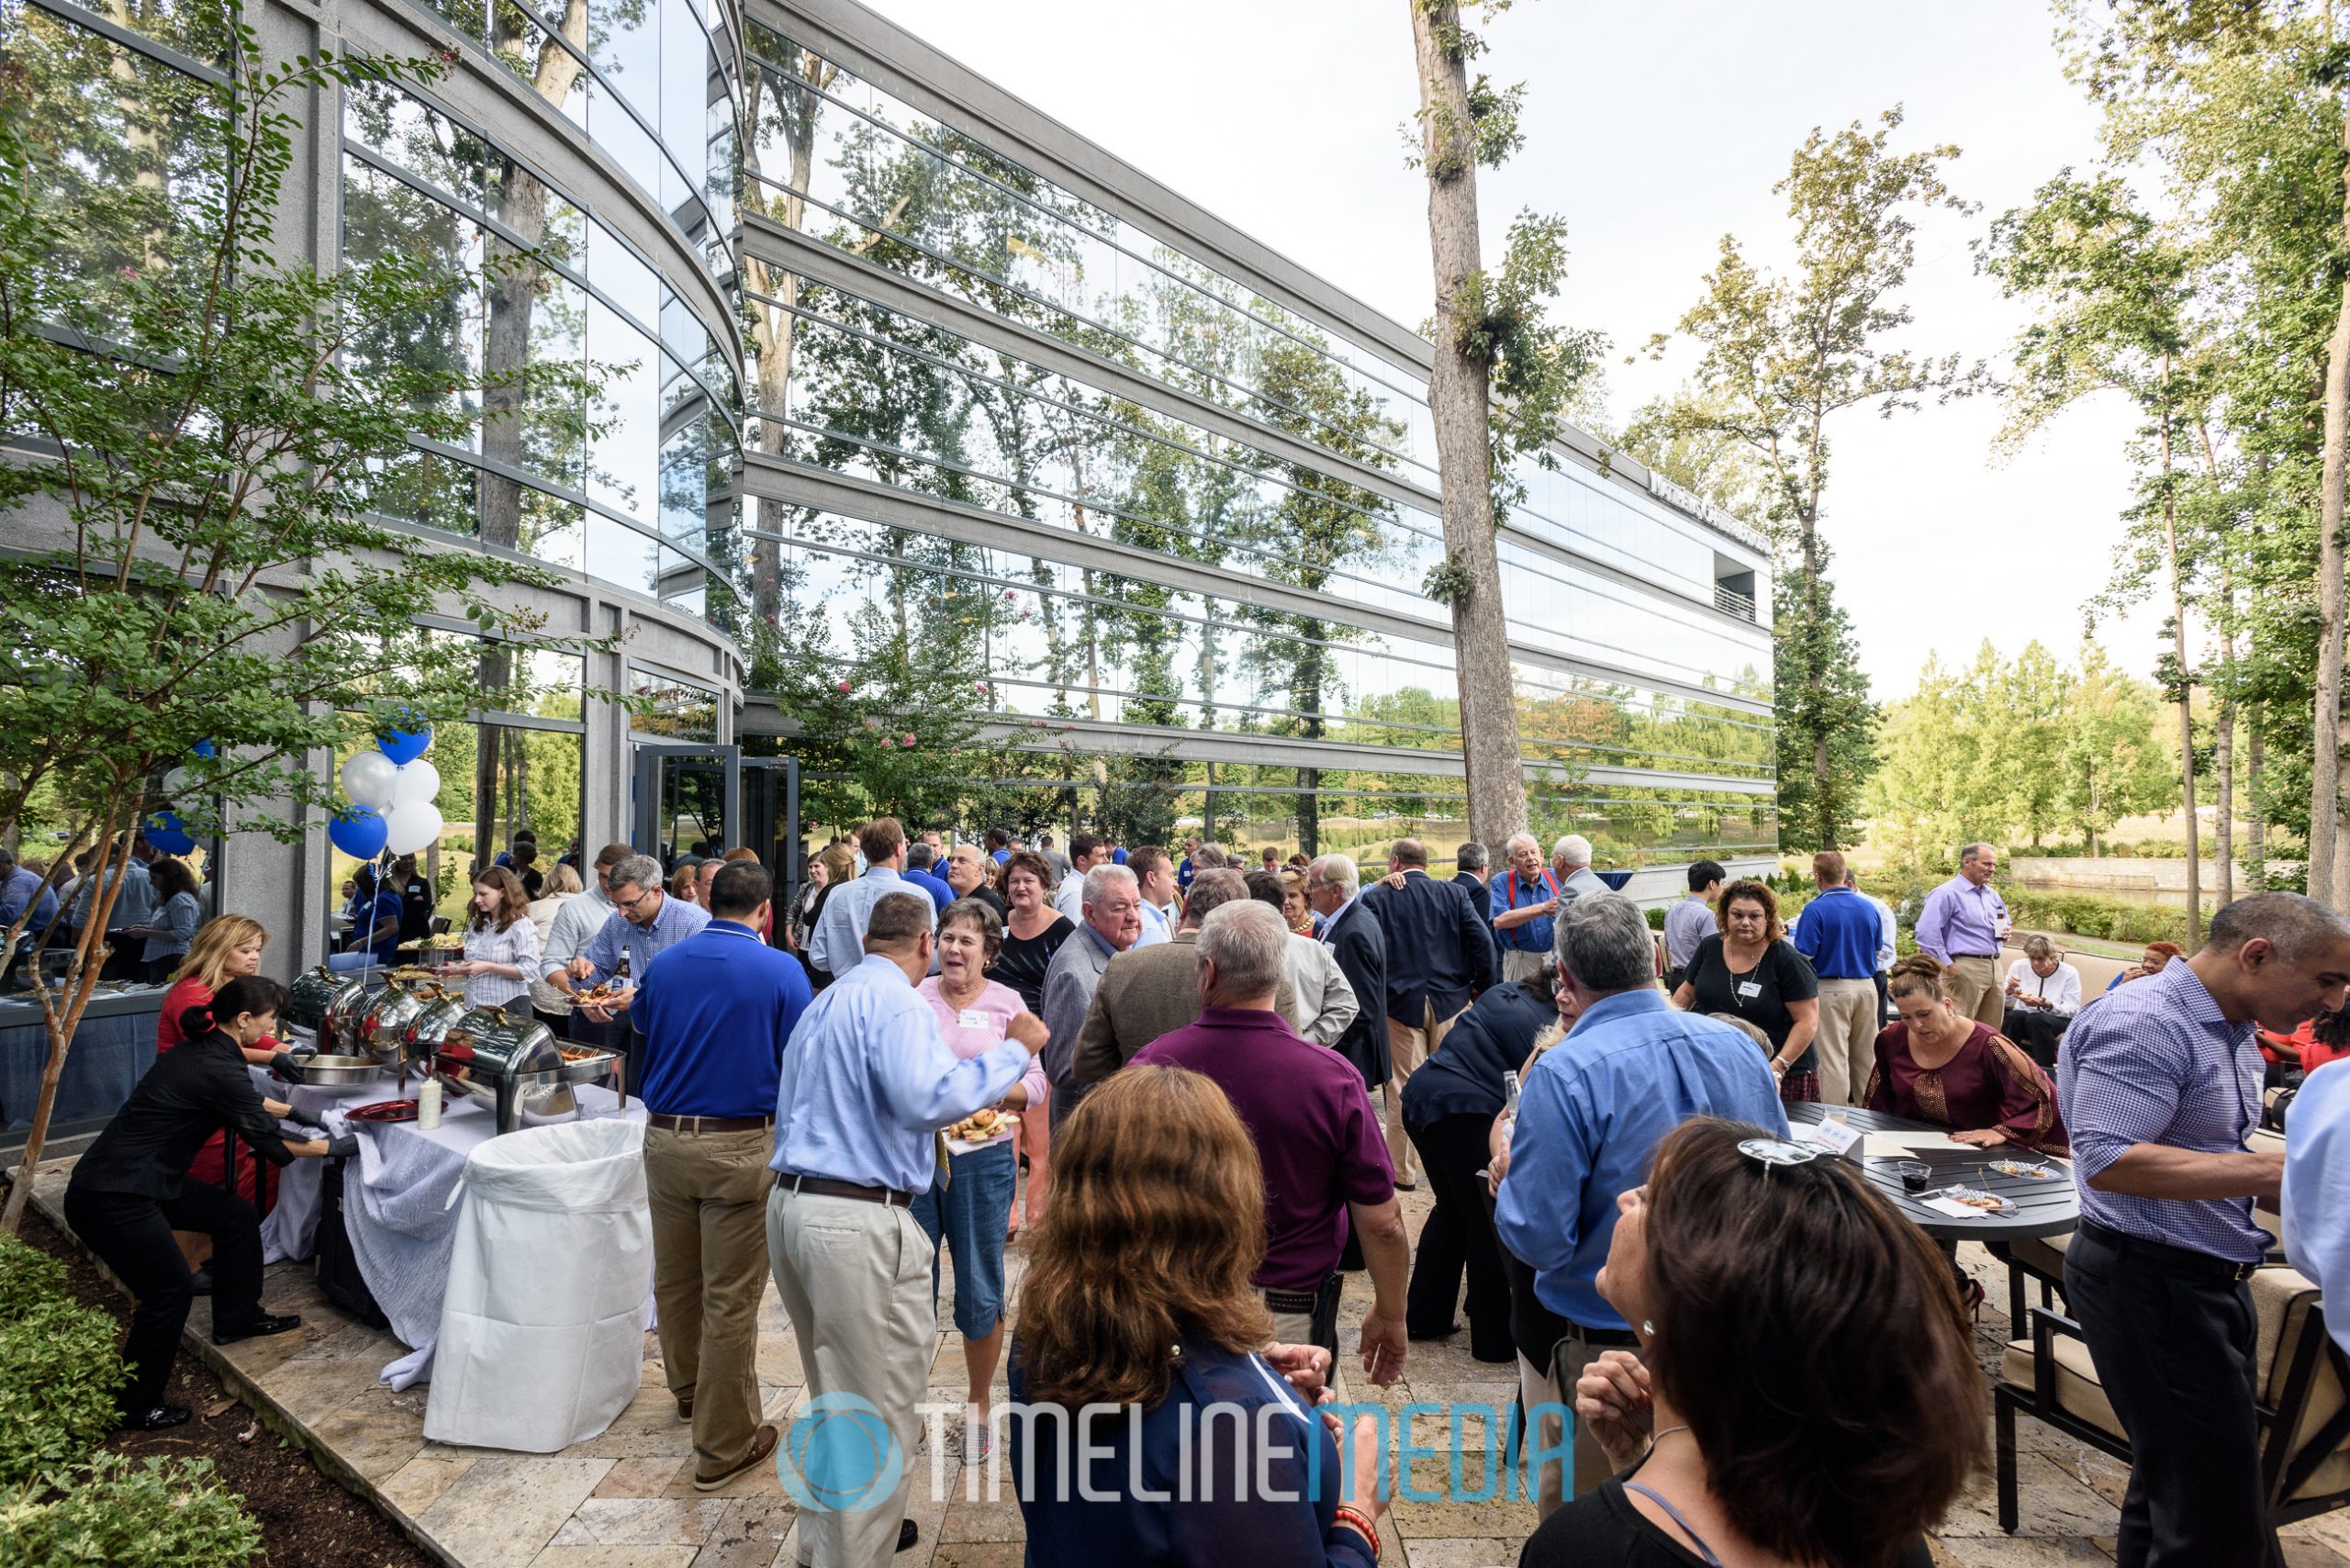 Buffet lines at the Peterson Companies Headquarters ©TimeLine Media